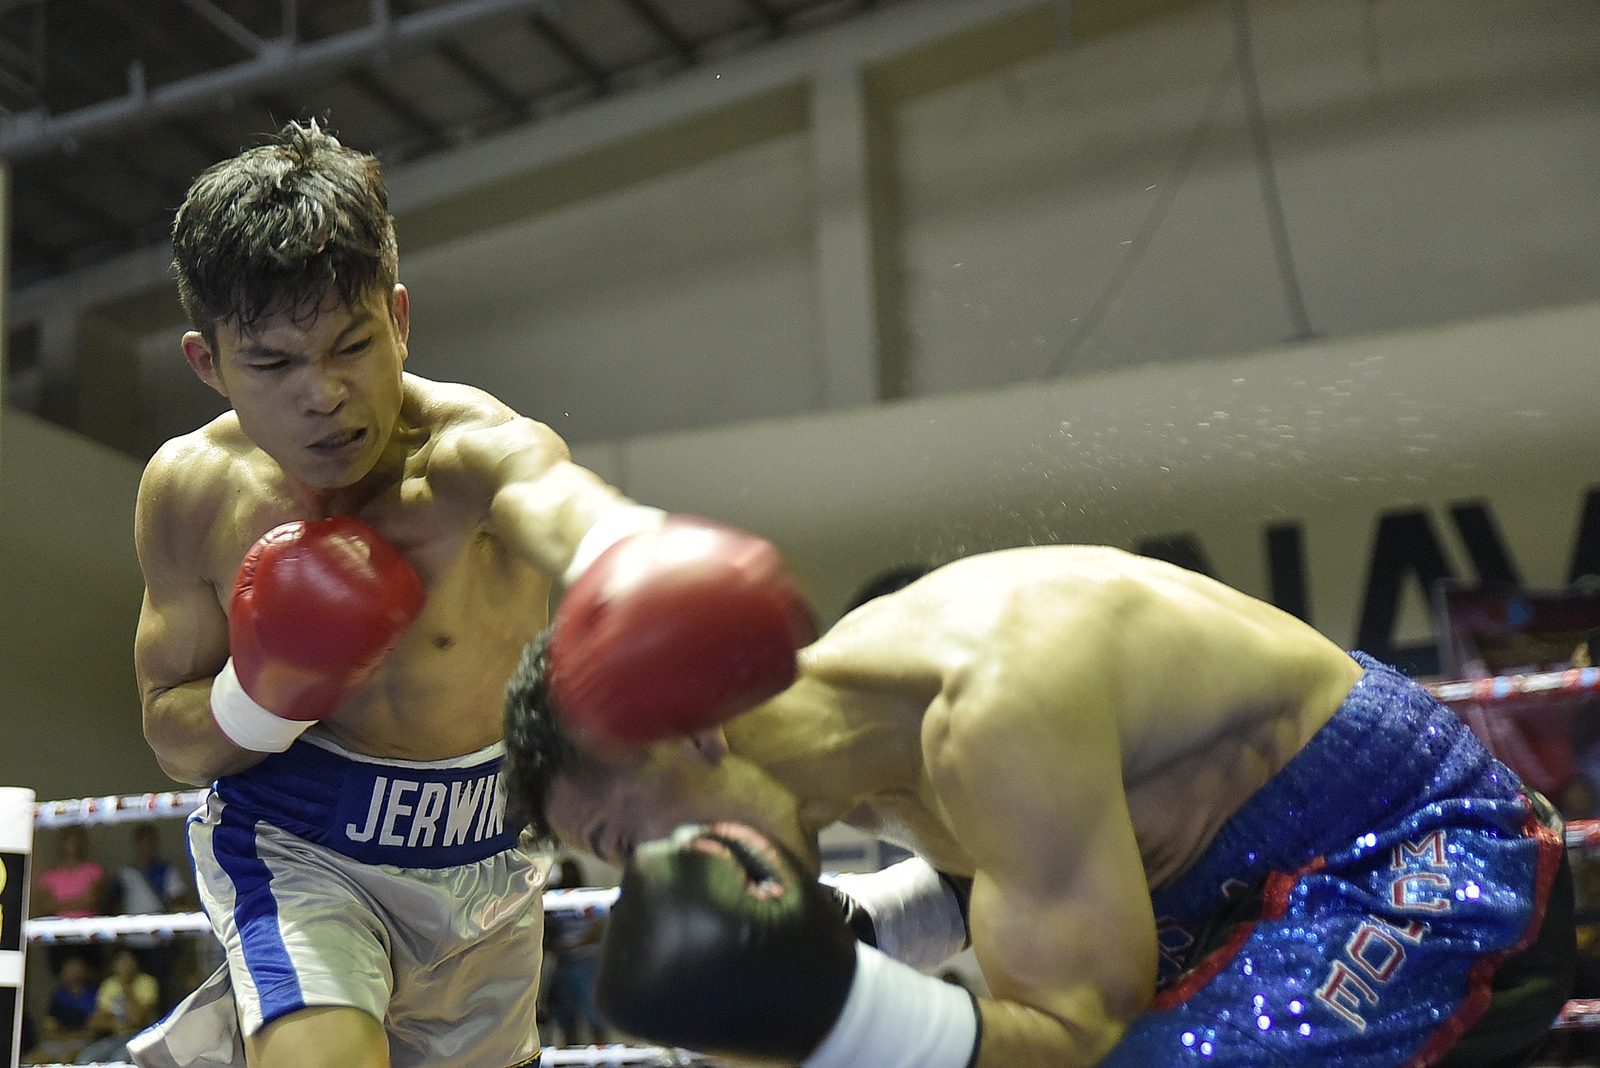 Jerwin Ancajas to make first world title defense in Macau